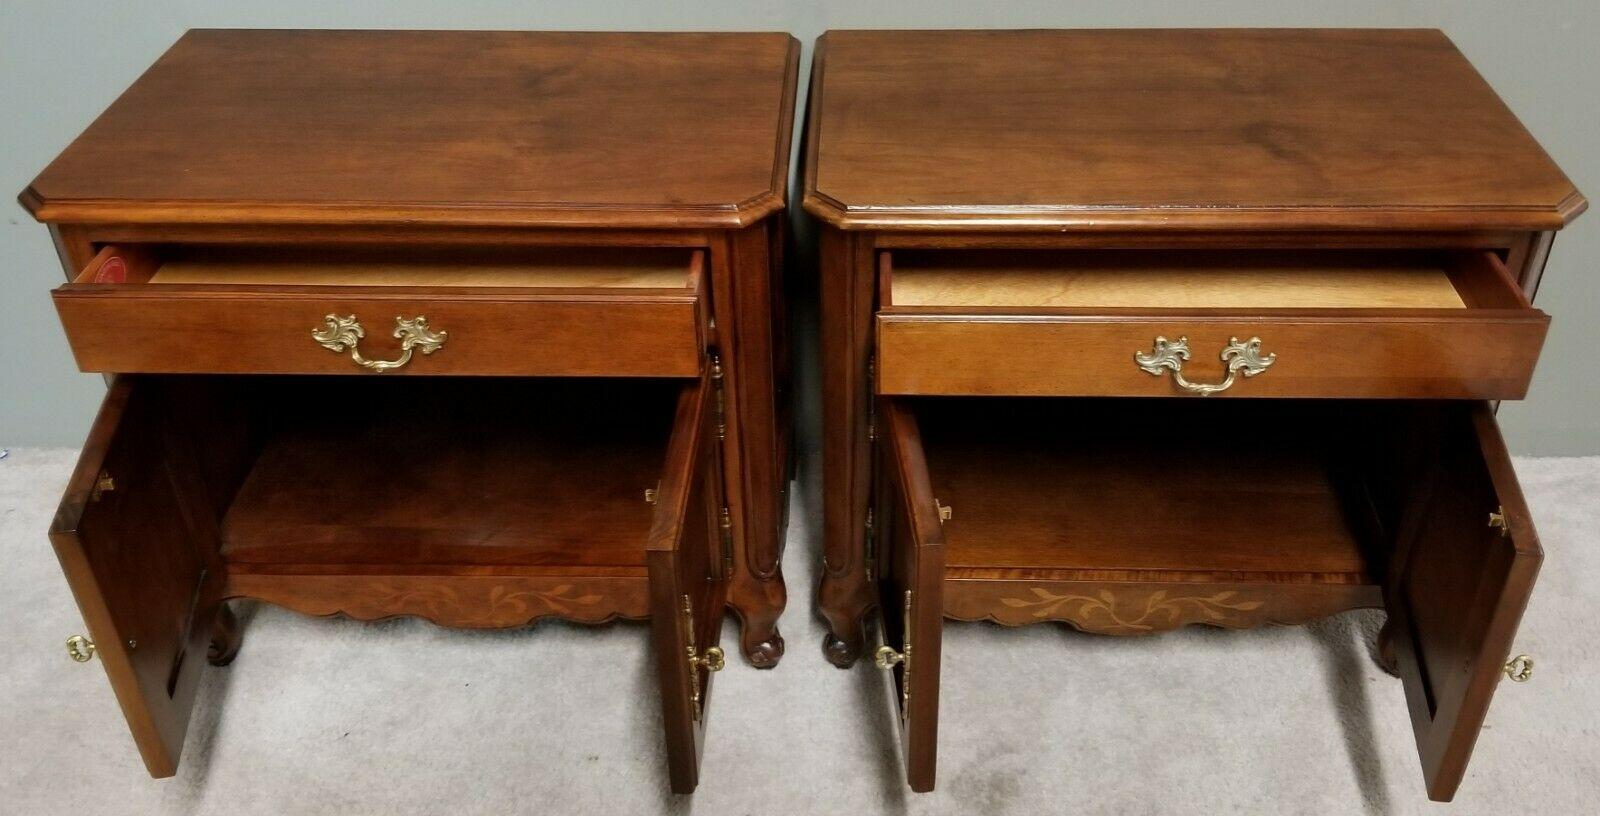 Wellington Hall French Provincial Solid Mahogany Nightstands 1